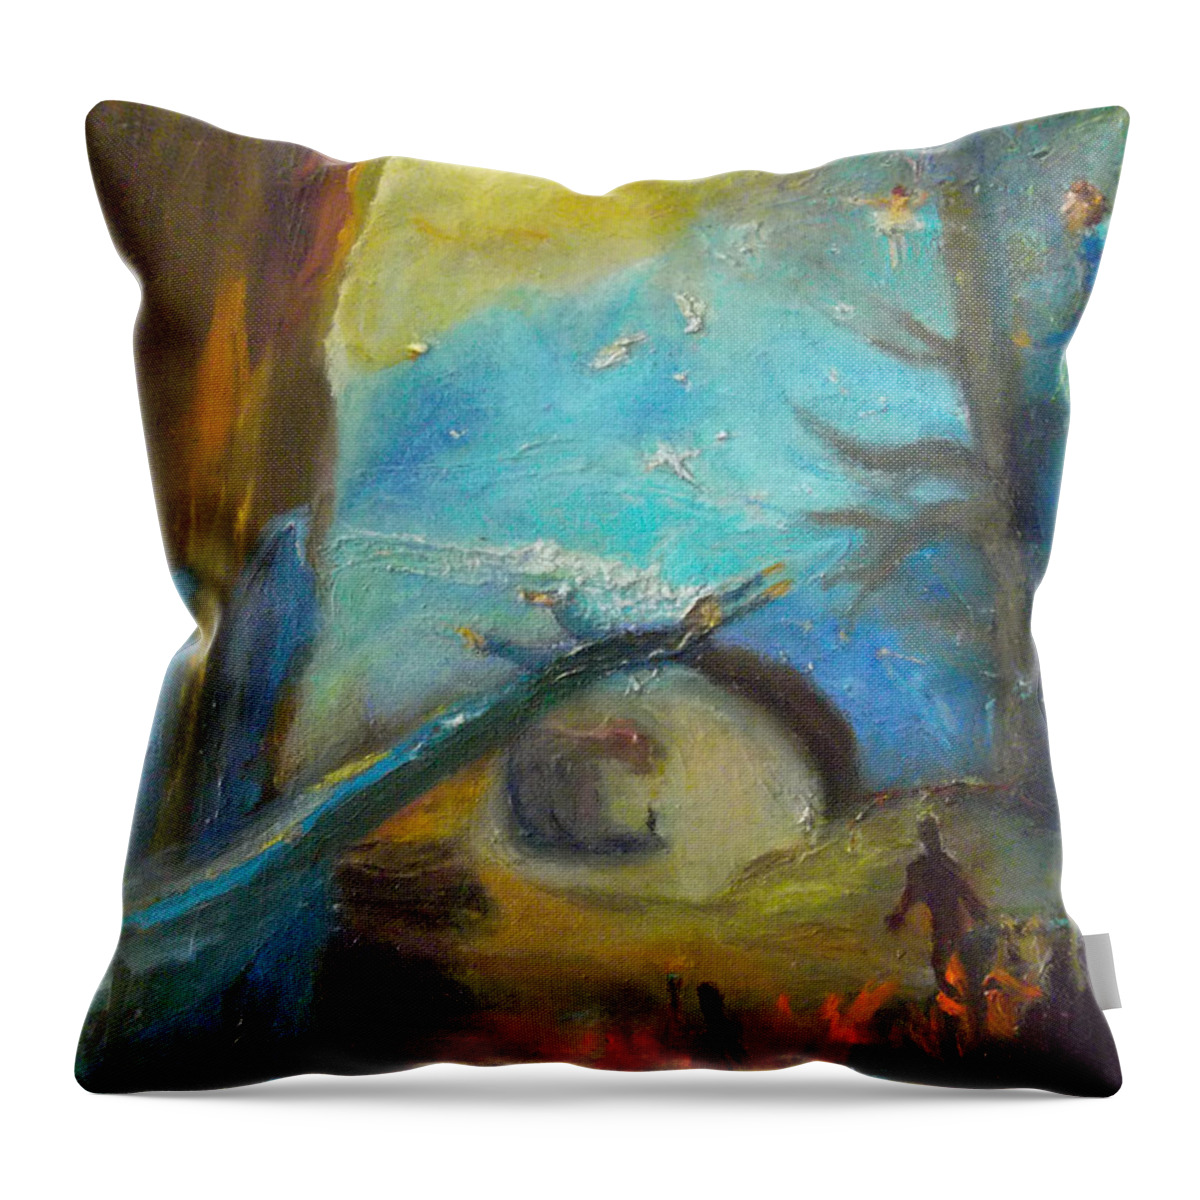 Abstract Throw Pillow featuring the painting Stream of Consciousness by Susan Esbensen